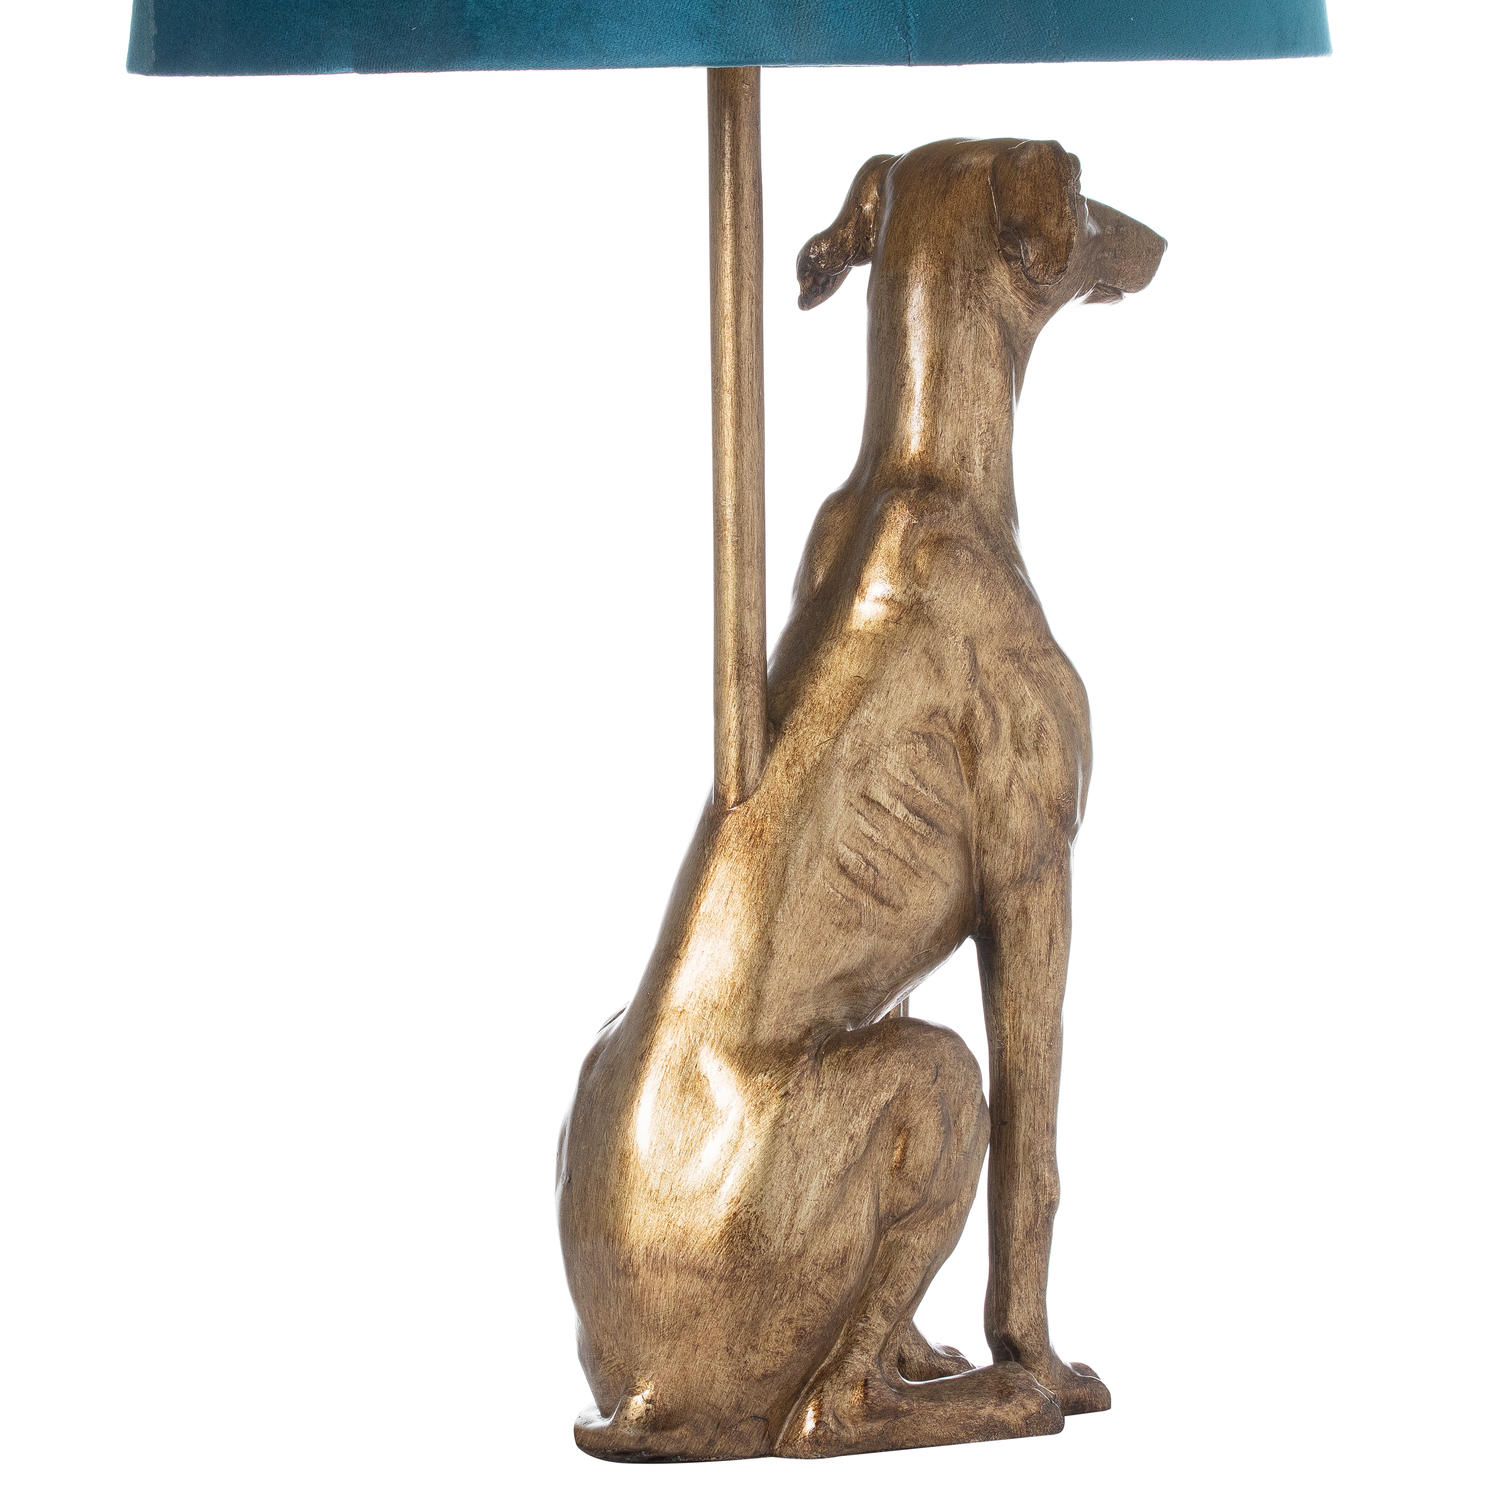 William The Whippet Table Lamp With Teal Velvet Shade - Image 3